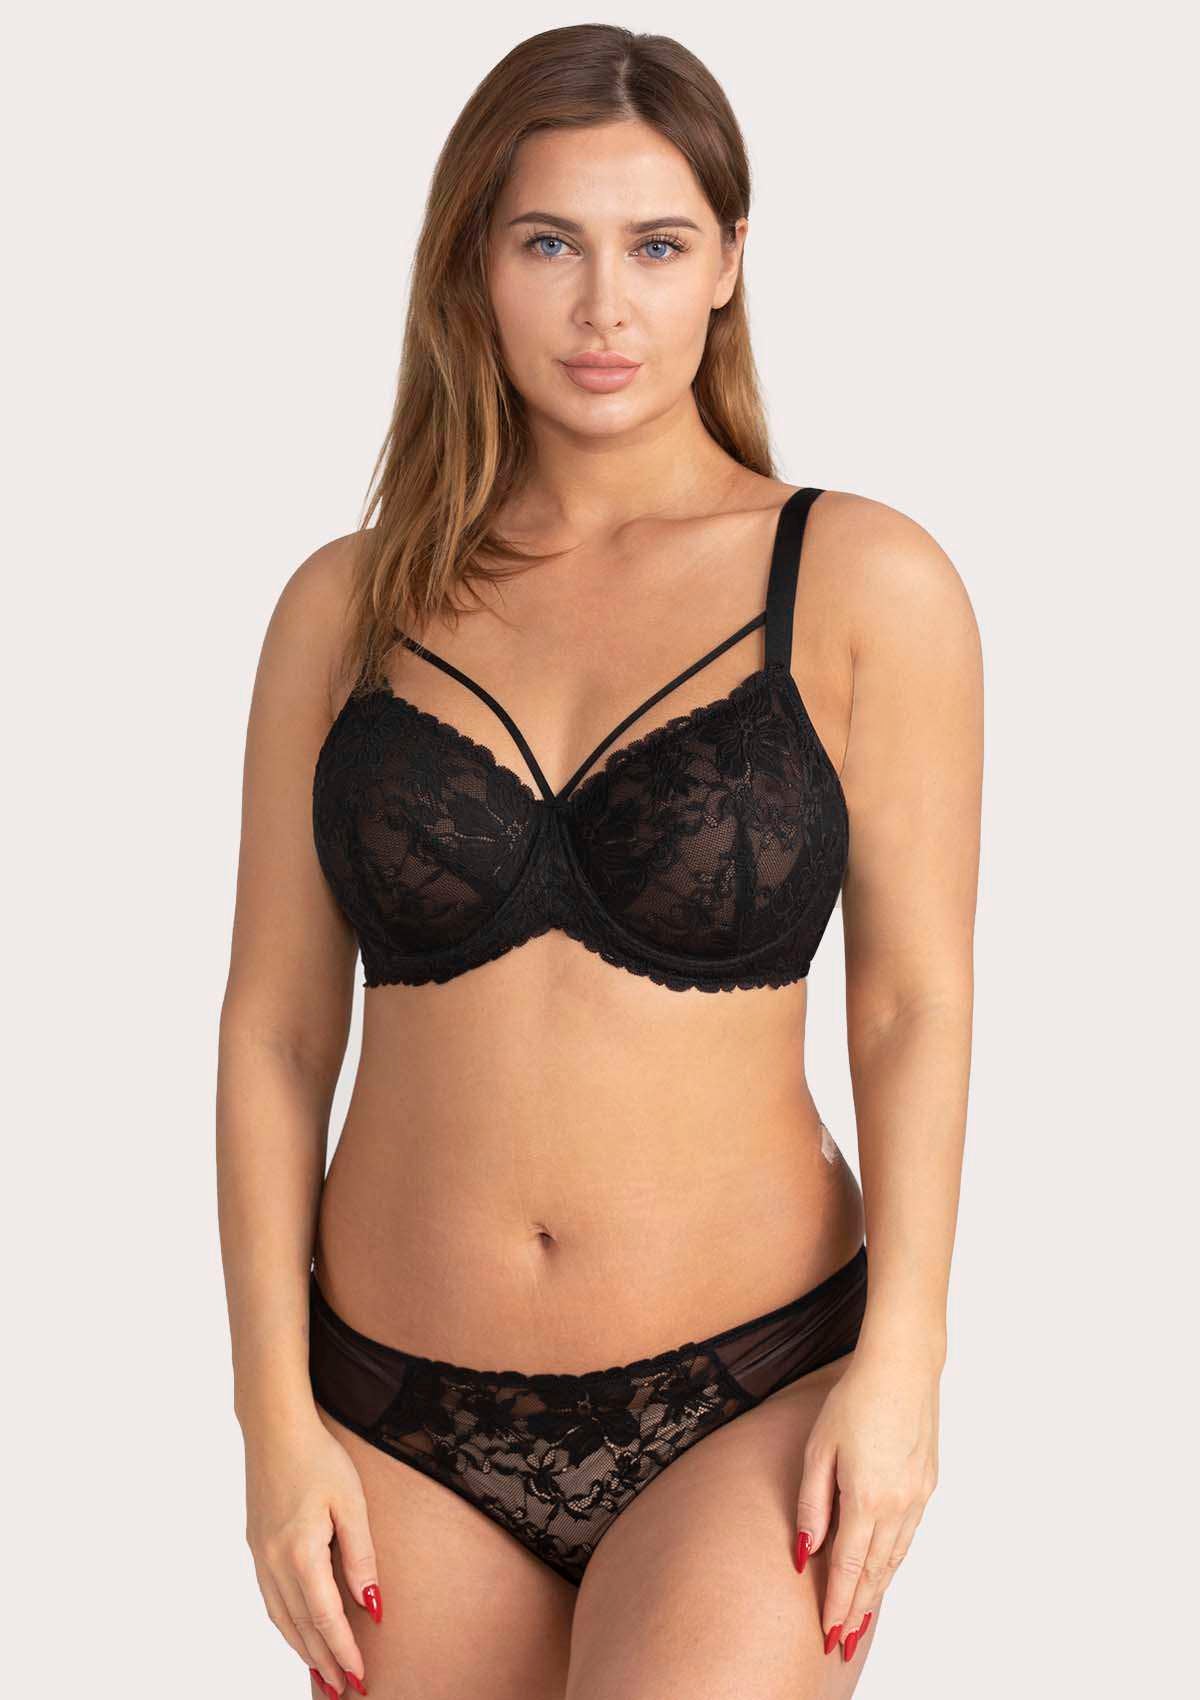 HSIA Pretty In Petals Lace Bra And Panty Set: Non Padded Wired Bra - Black / 32 / DDD/F